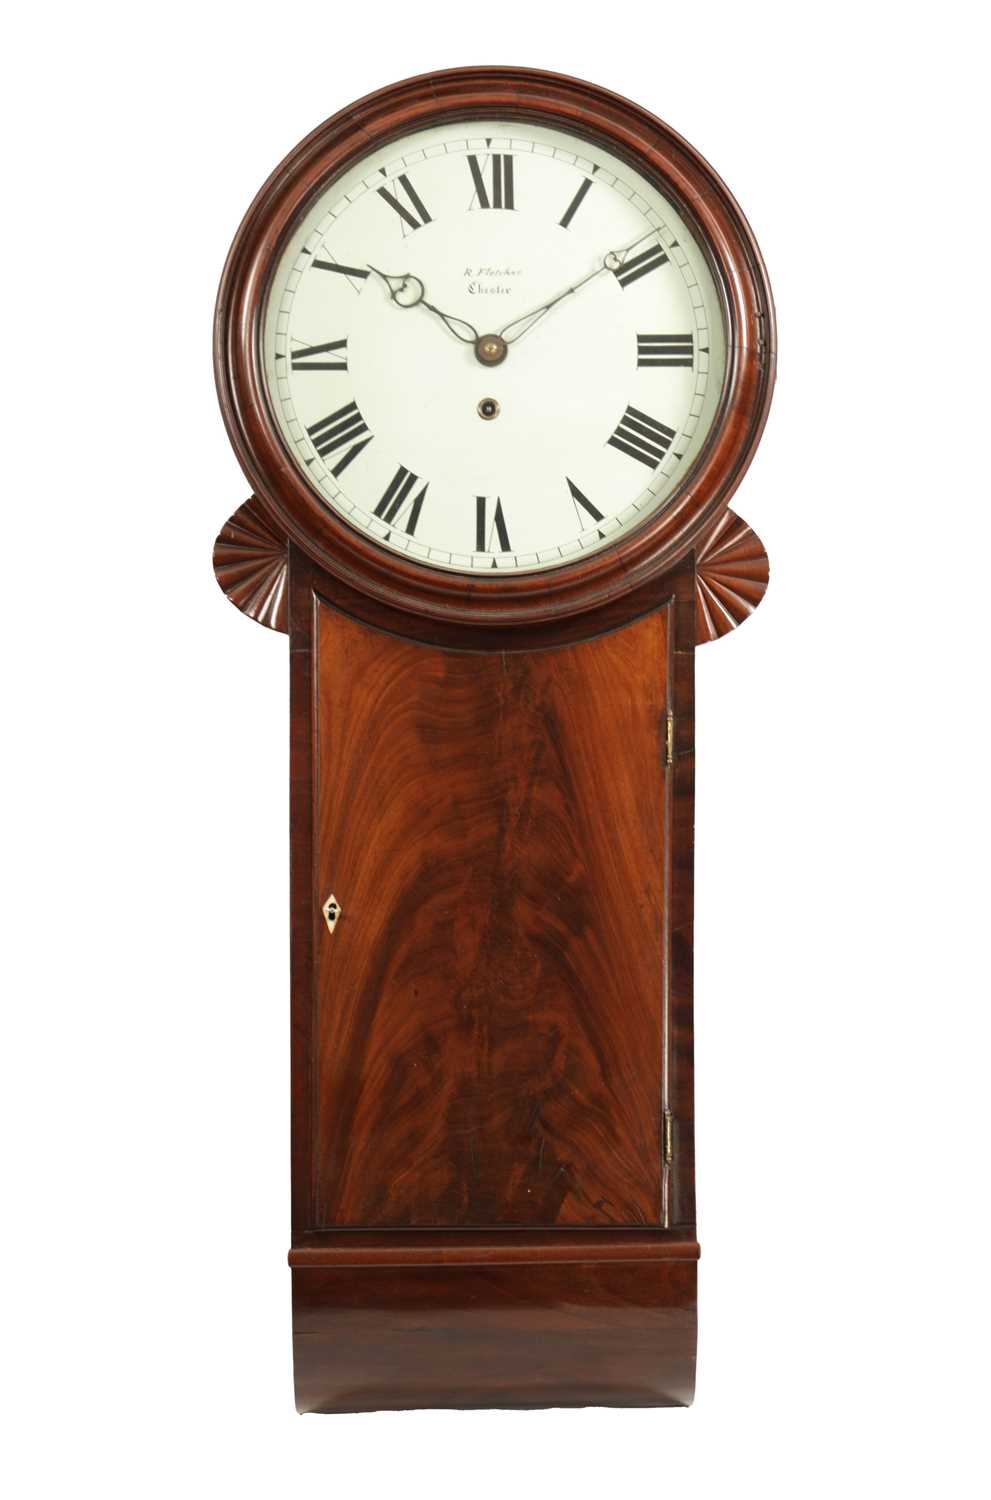 R. FLETCHER, CHESTER. A GOOD GEORGE III MAHOGANY EIGHT-DAY WEIGHT DRIVEN TRUNK DIAL WALL CLOCK